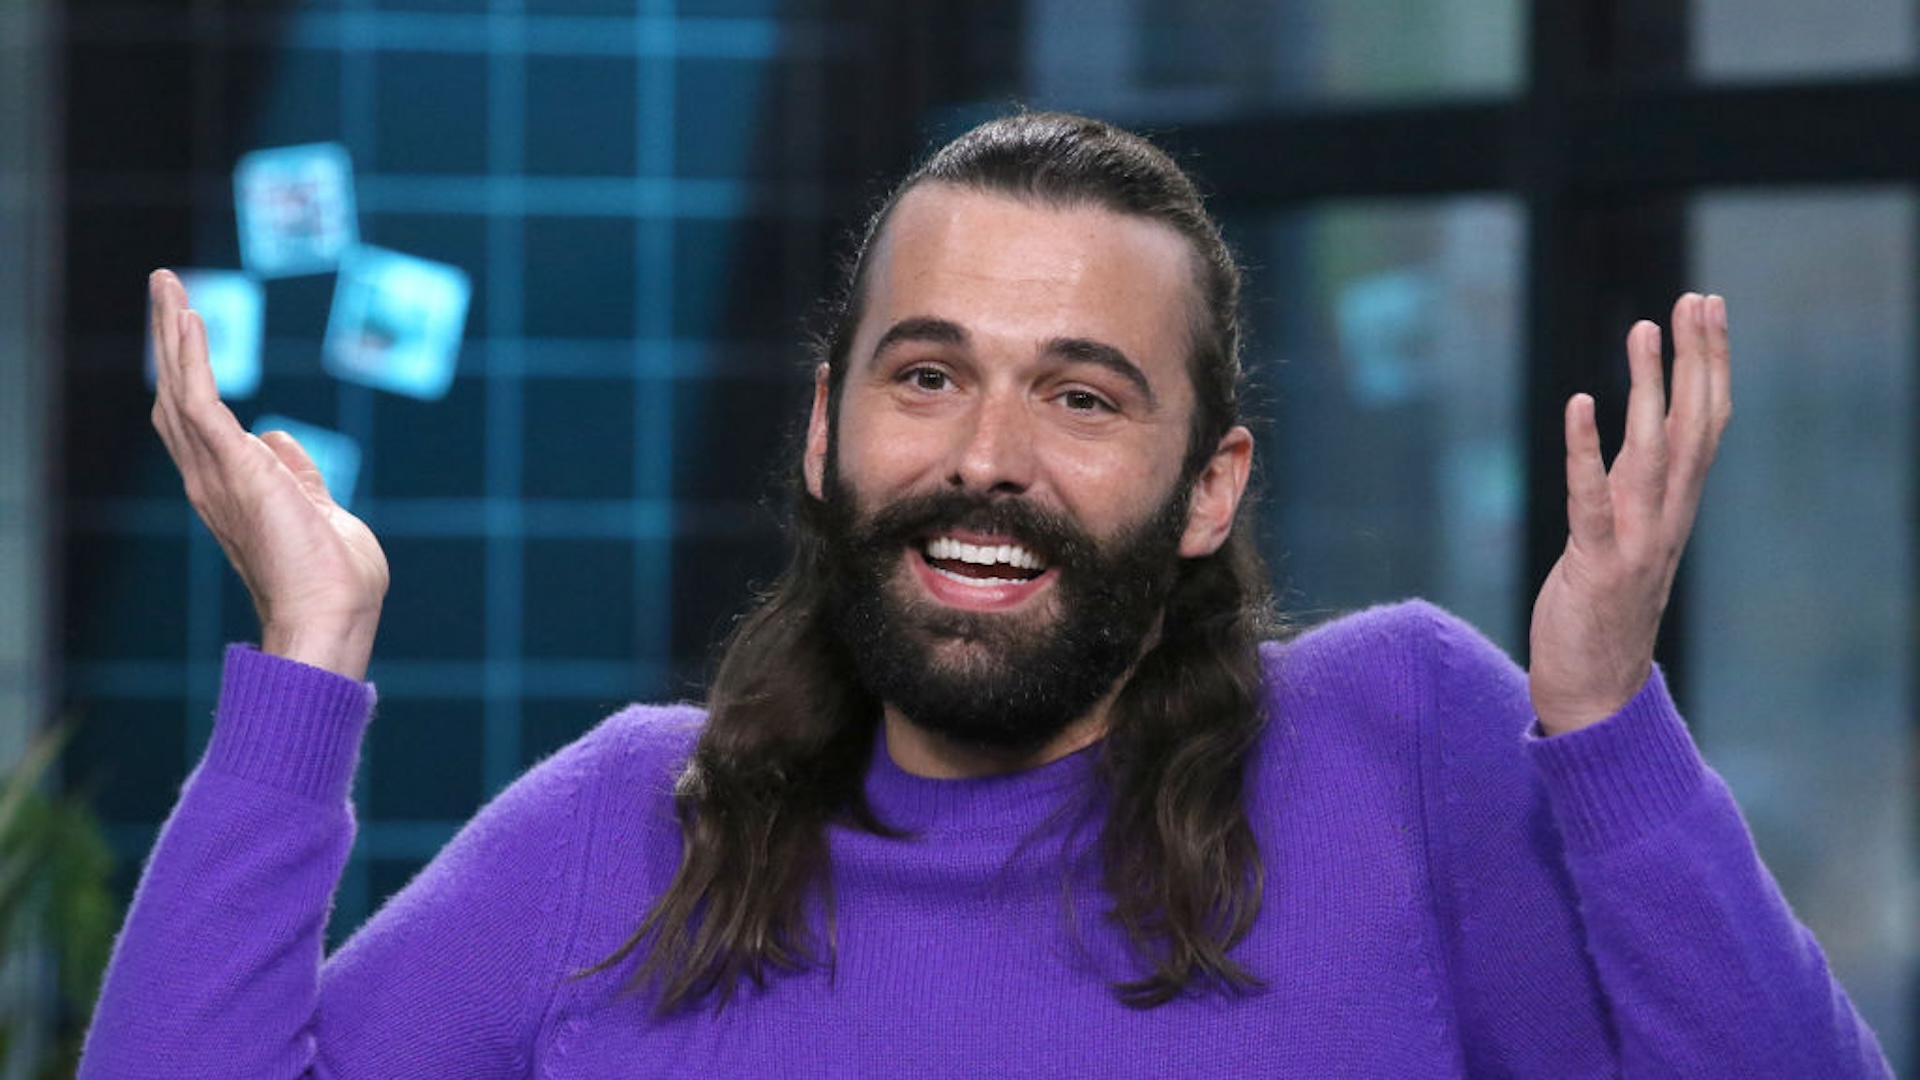 TV Personality Jonathan Van Ness attends the Build Series to discuss his new book "Over the Top: A Raw Journey to Self-Love" at Build Studio on September 25, 2019 in New York City.